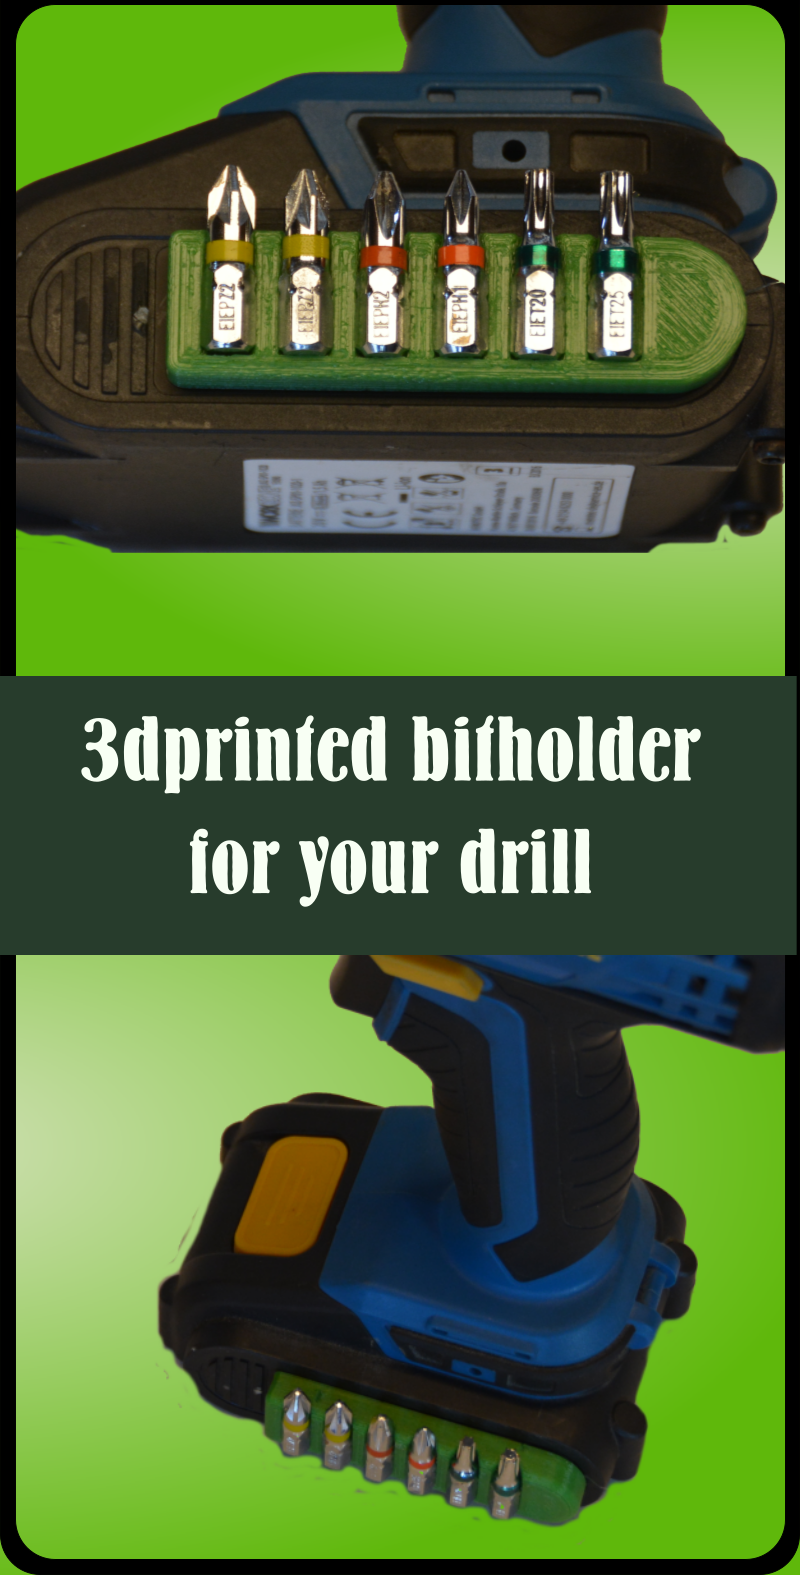 3dprinted bitholder for your drill - With this bitholder all the bits you need will be always at hand and easy to reach.